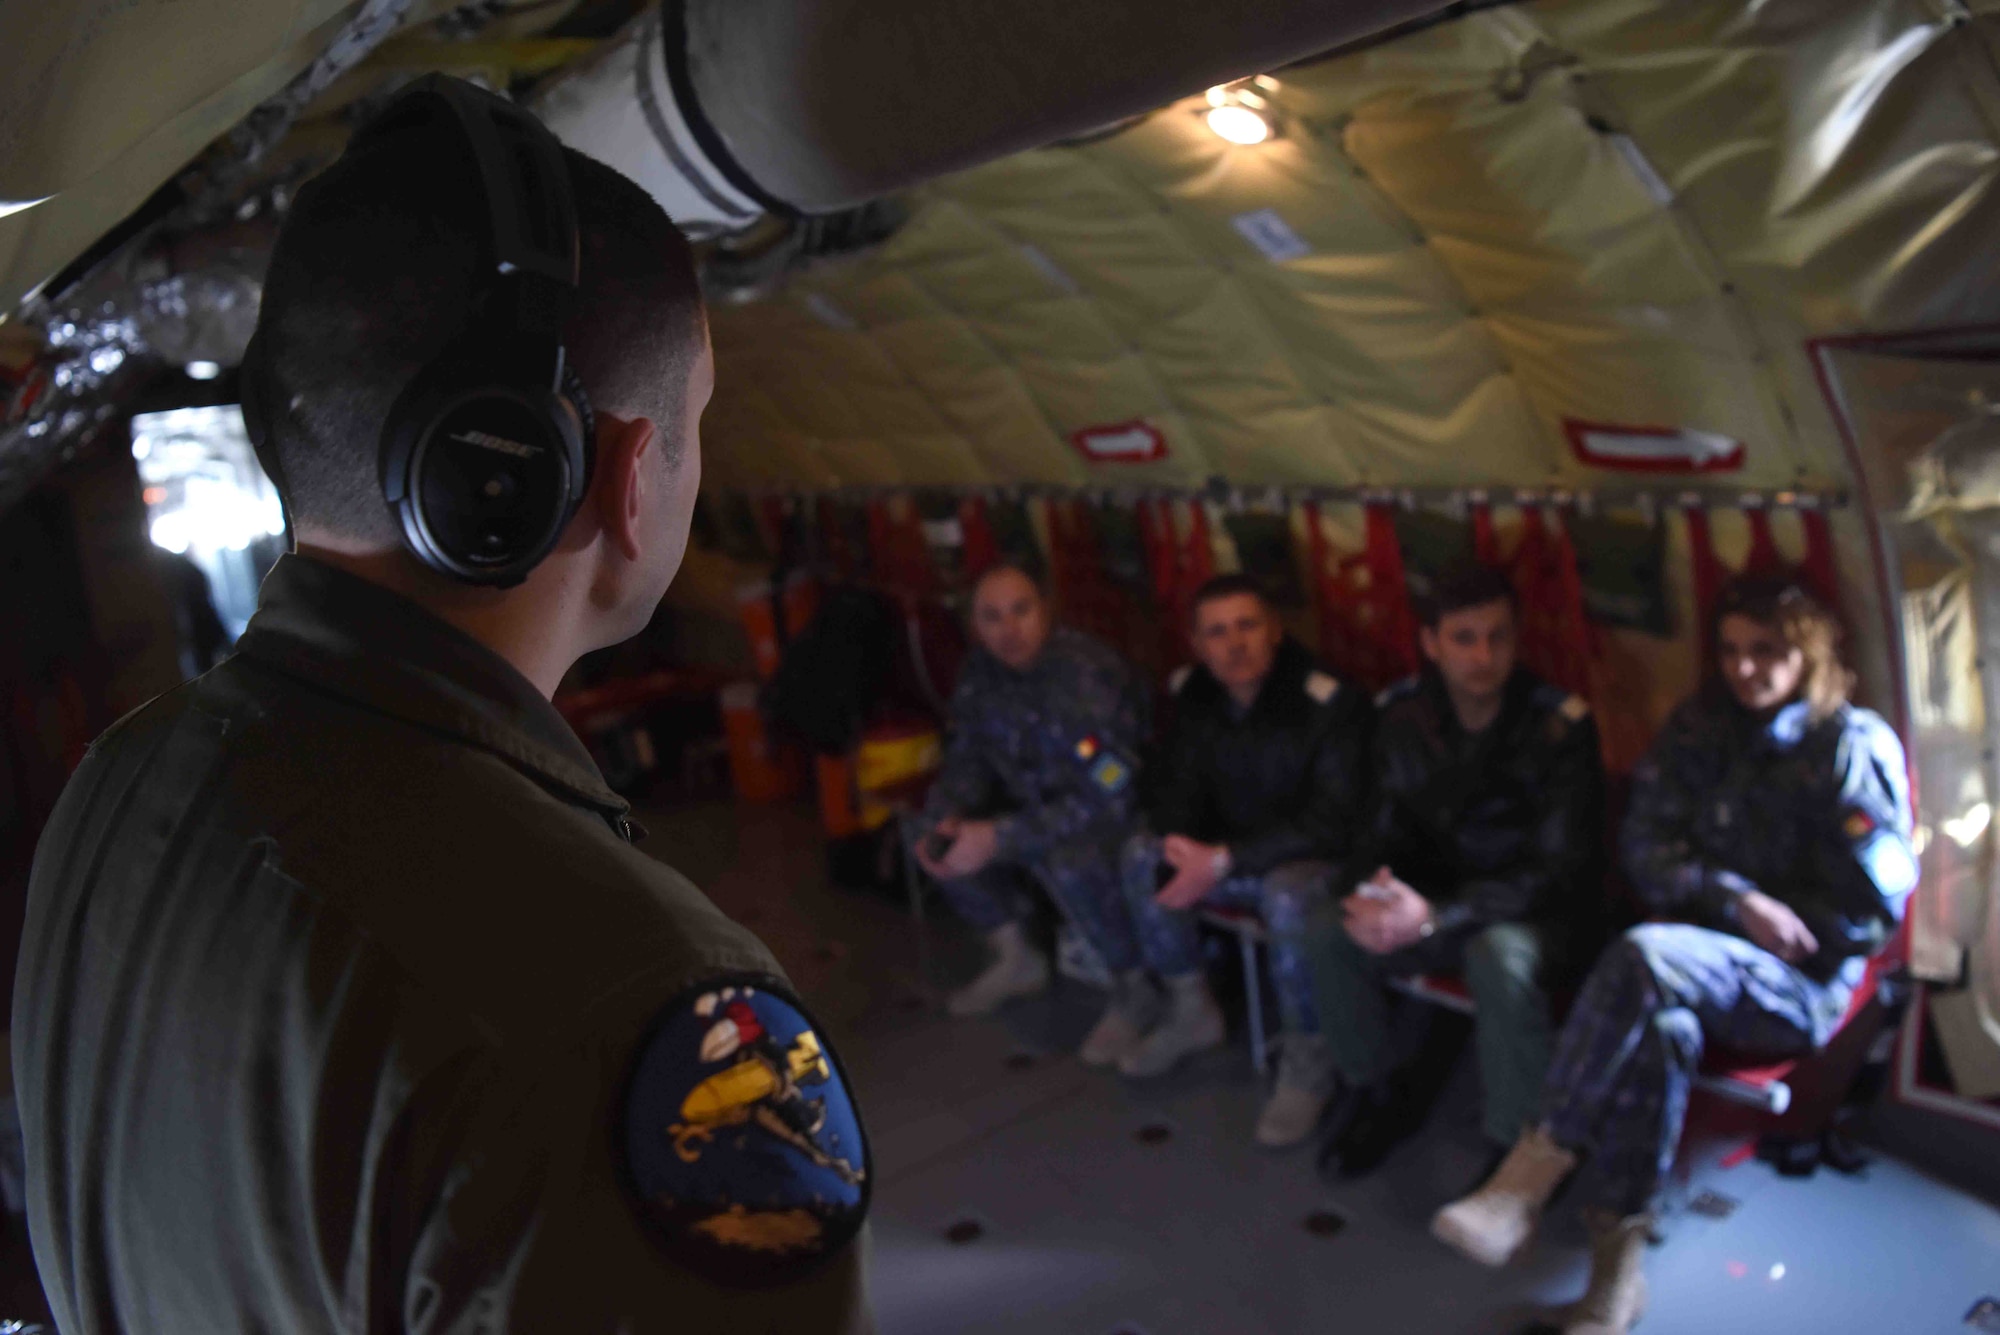 U.S. Air Force Senior Airman Corey Marion, 351st Air Refueling Squadron boom operator, goes over flight procedures with Romanian air force members aboard a KC-135 Stratotanker in Bucharest, Romania, March 13, 2019. The crew trained with Romanian air force F-16s over the skies of Romania, which enhanced regional capabilities to secure air sovereignty and promote peace and security through cooperation, collaboration, interoperability with NATO allies in the region. (U.S. Air Force photo by Airman 1st Class Brandon Esau)